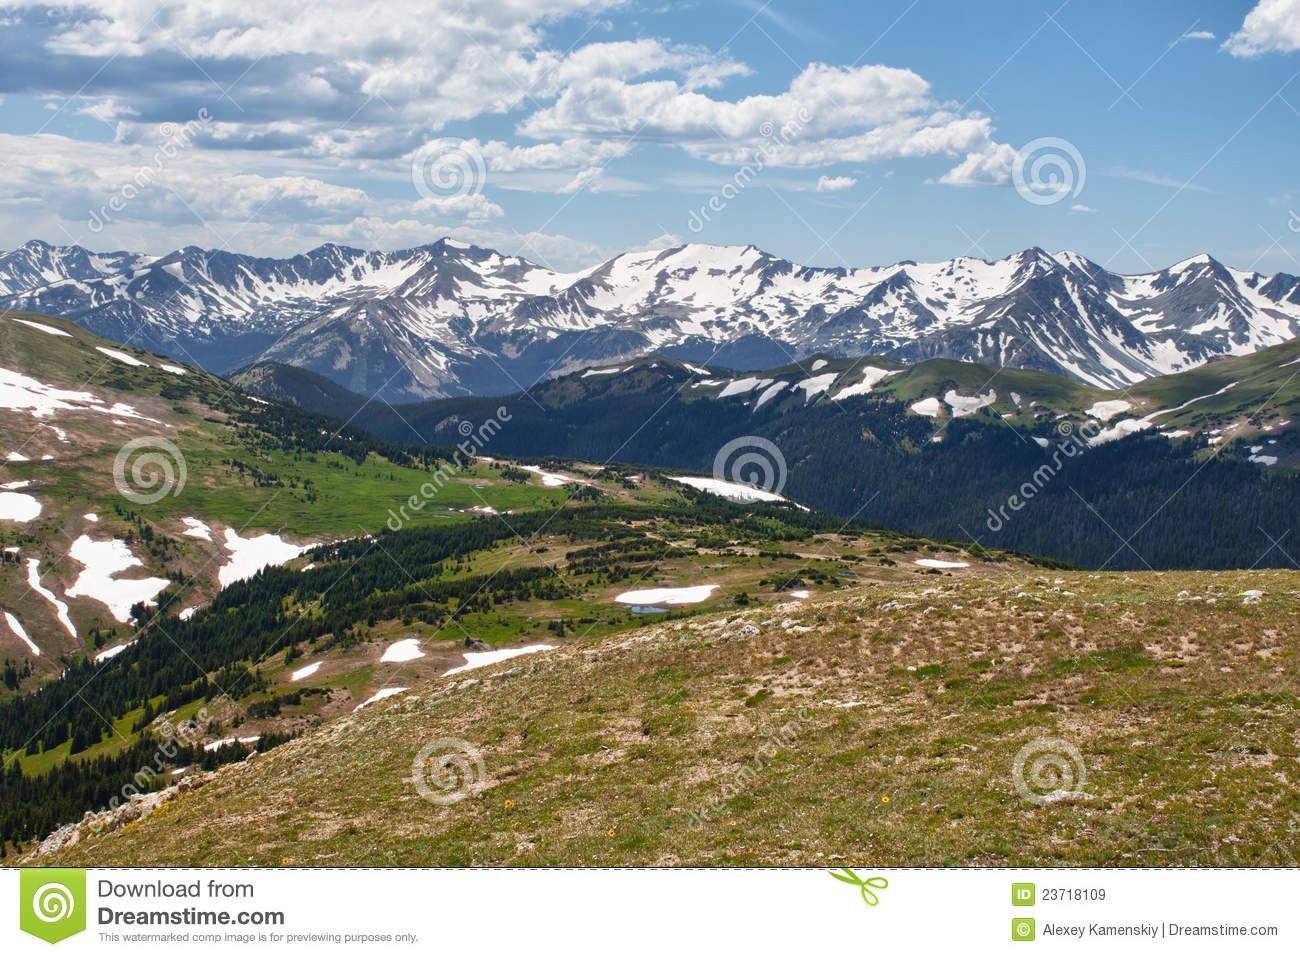 Overlook Over The Rocky Mountains Colorado Royalty Free Stock Images